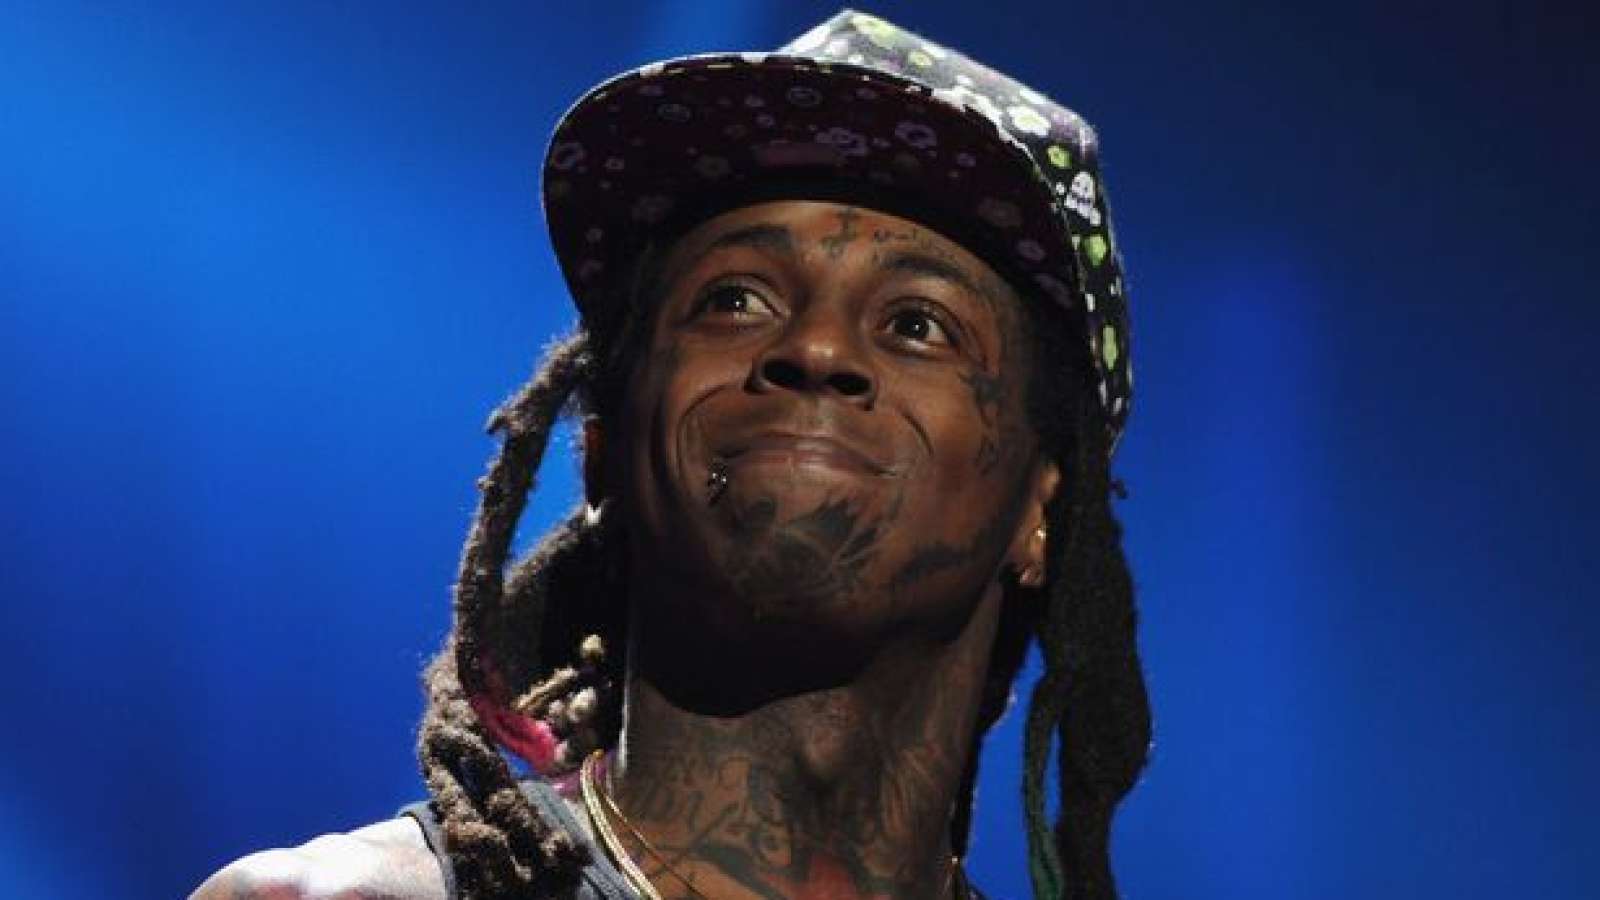 Lil Wayne: Rapper could face battery charges